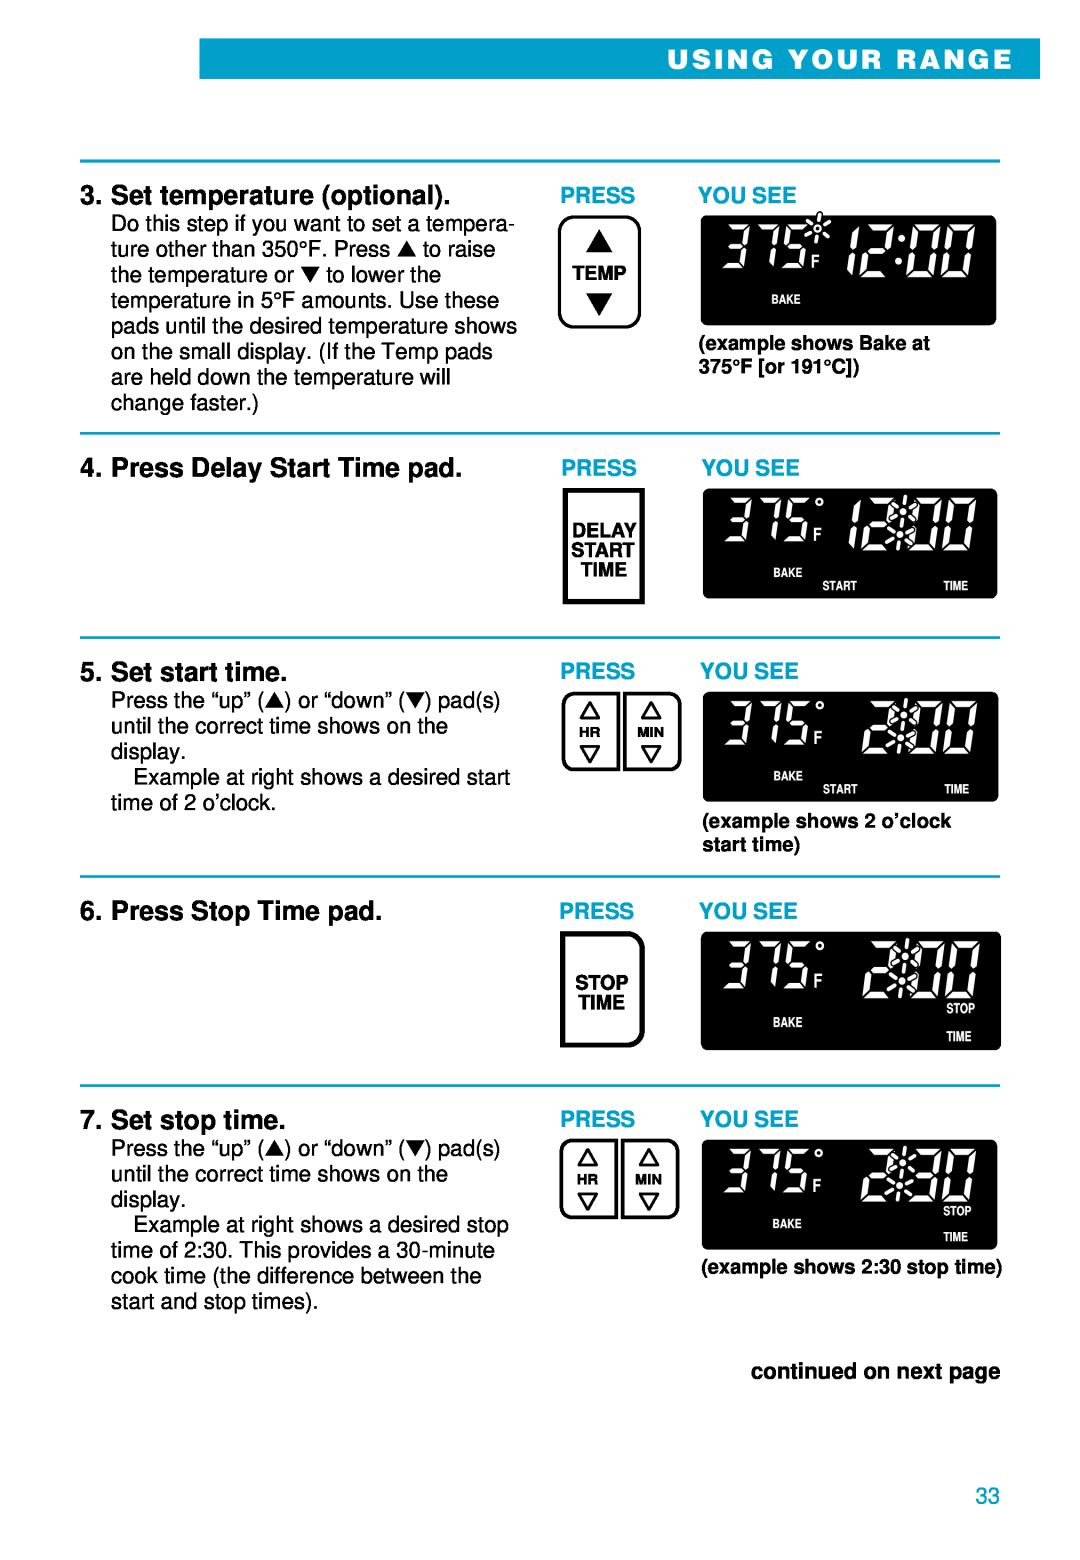 Whirlpool RS610PXE Press Delay Start Time pad, Set start time, Press Stop Time pad, Set stop time, Using Your Range 